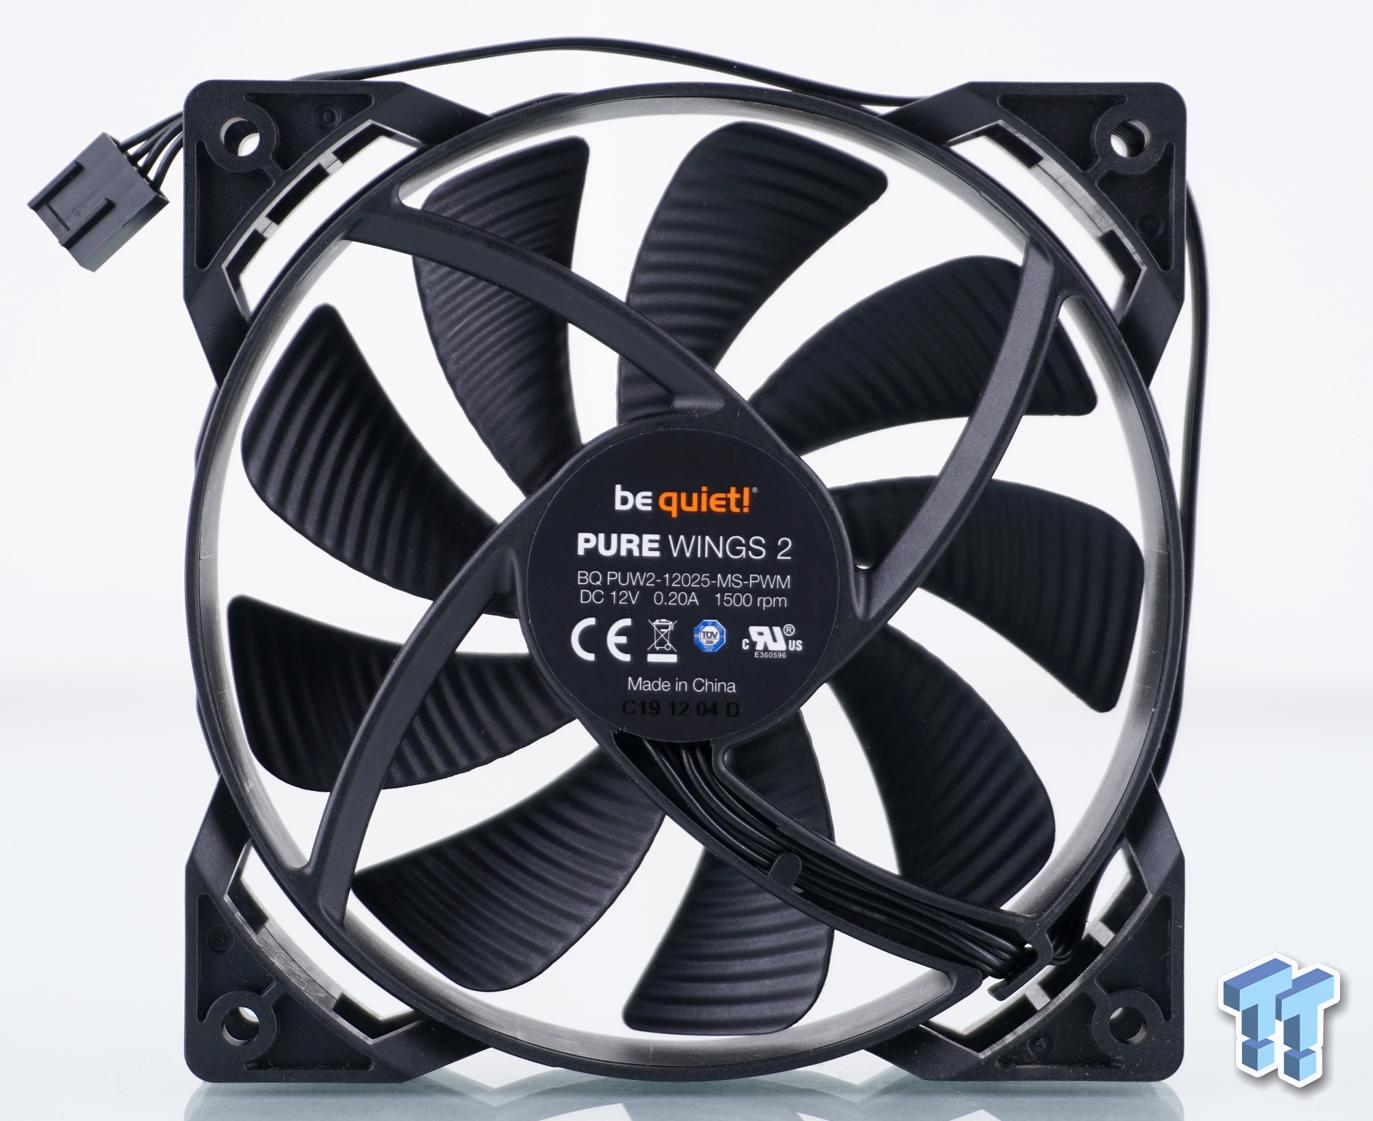 2 Pure be CPU Rock quiet! Review Cooler